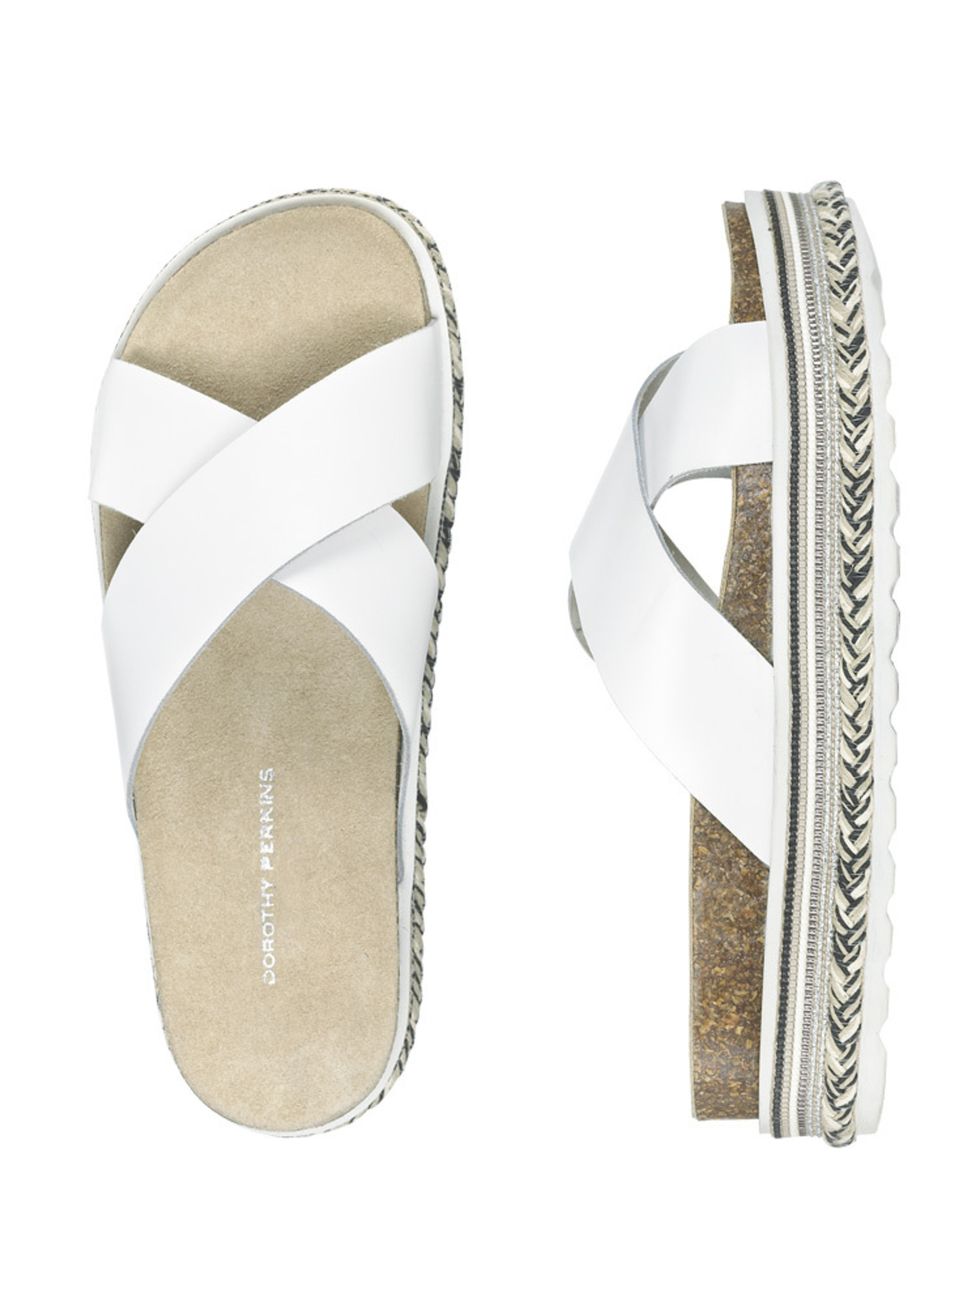 "I like to keep it simple, minimal and easy."

Leather sandals, £20, Dorothy Perkins